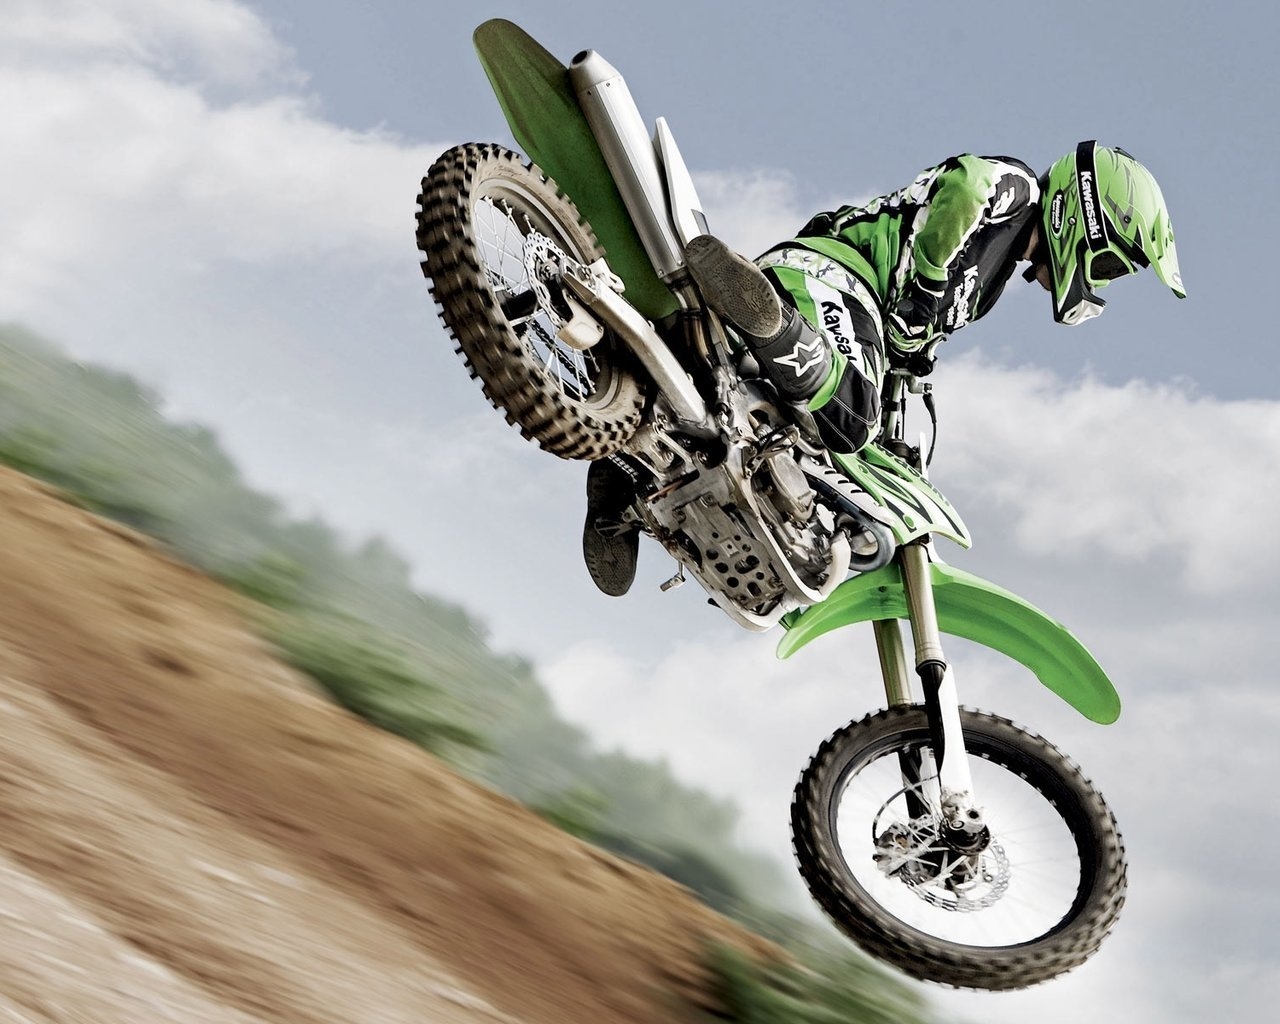 Super Moto Race for 1280 x 1024 resolution